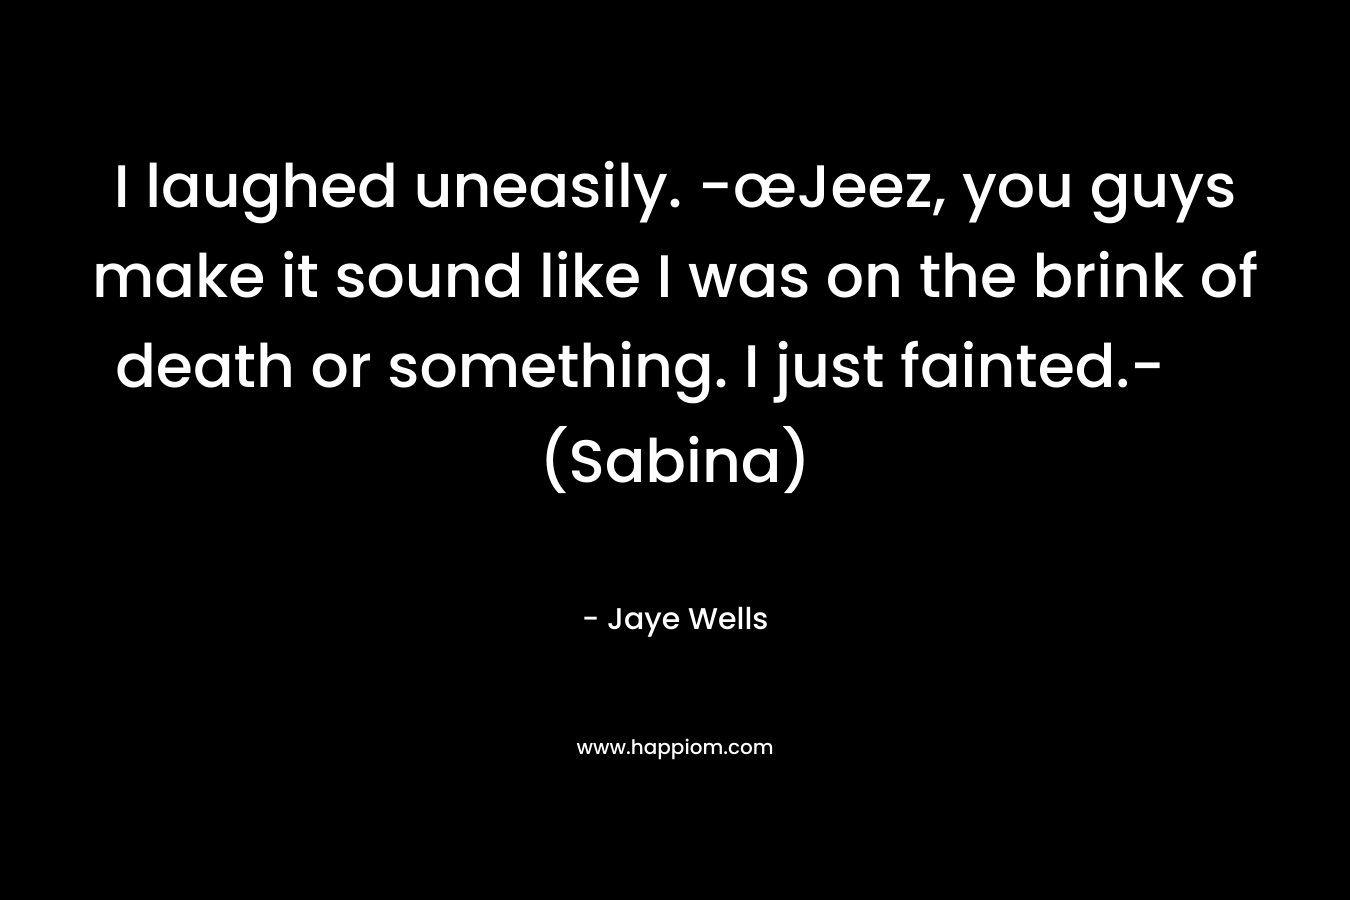 I laughed uneasily. -œJeez, you guys make it sound like I was on the brink of death or something. I just fainted.- (Sabina)